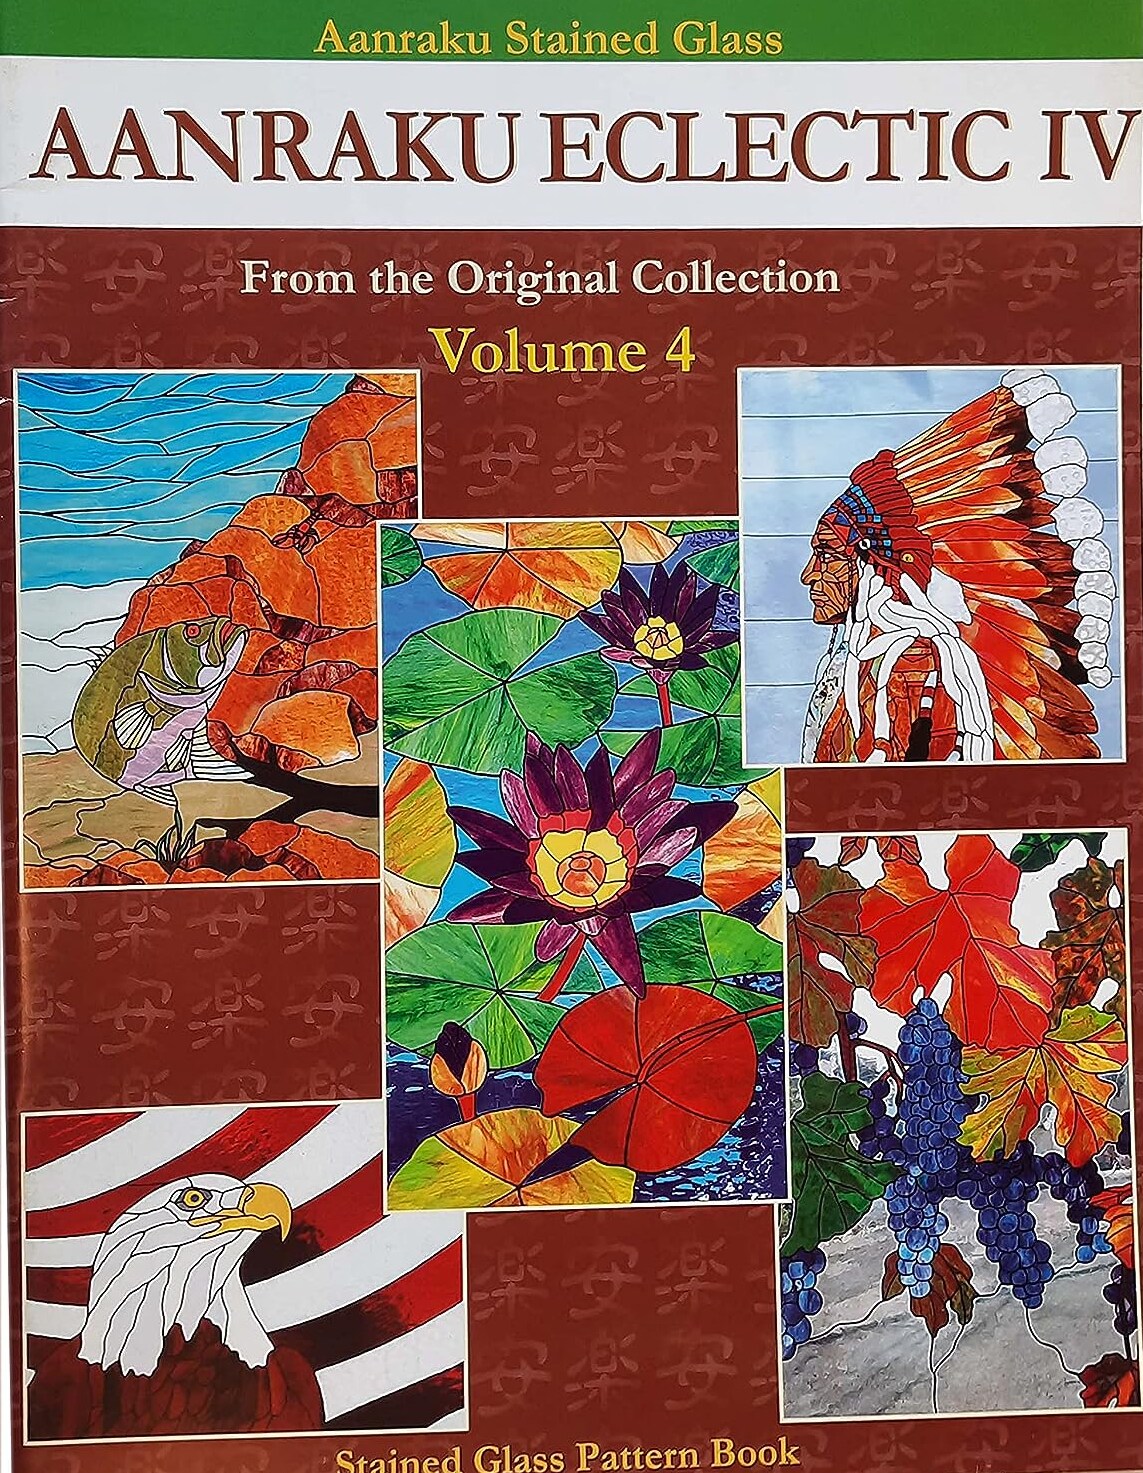 Stained Glass Pattern Book: Aanraku Eclectic Stained Glass Pattern Book Volume 4